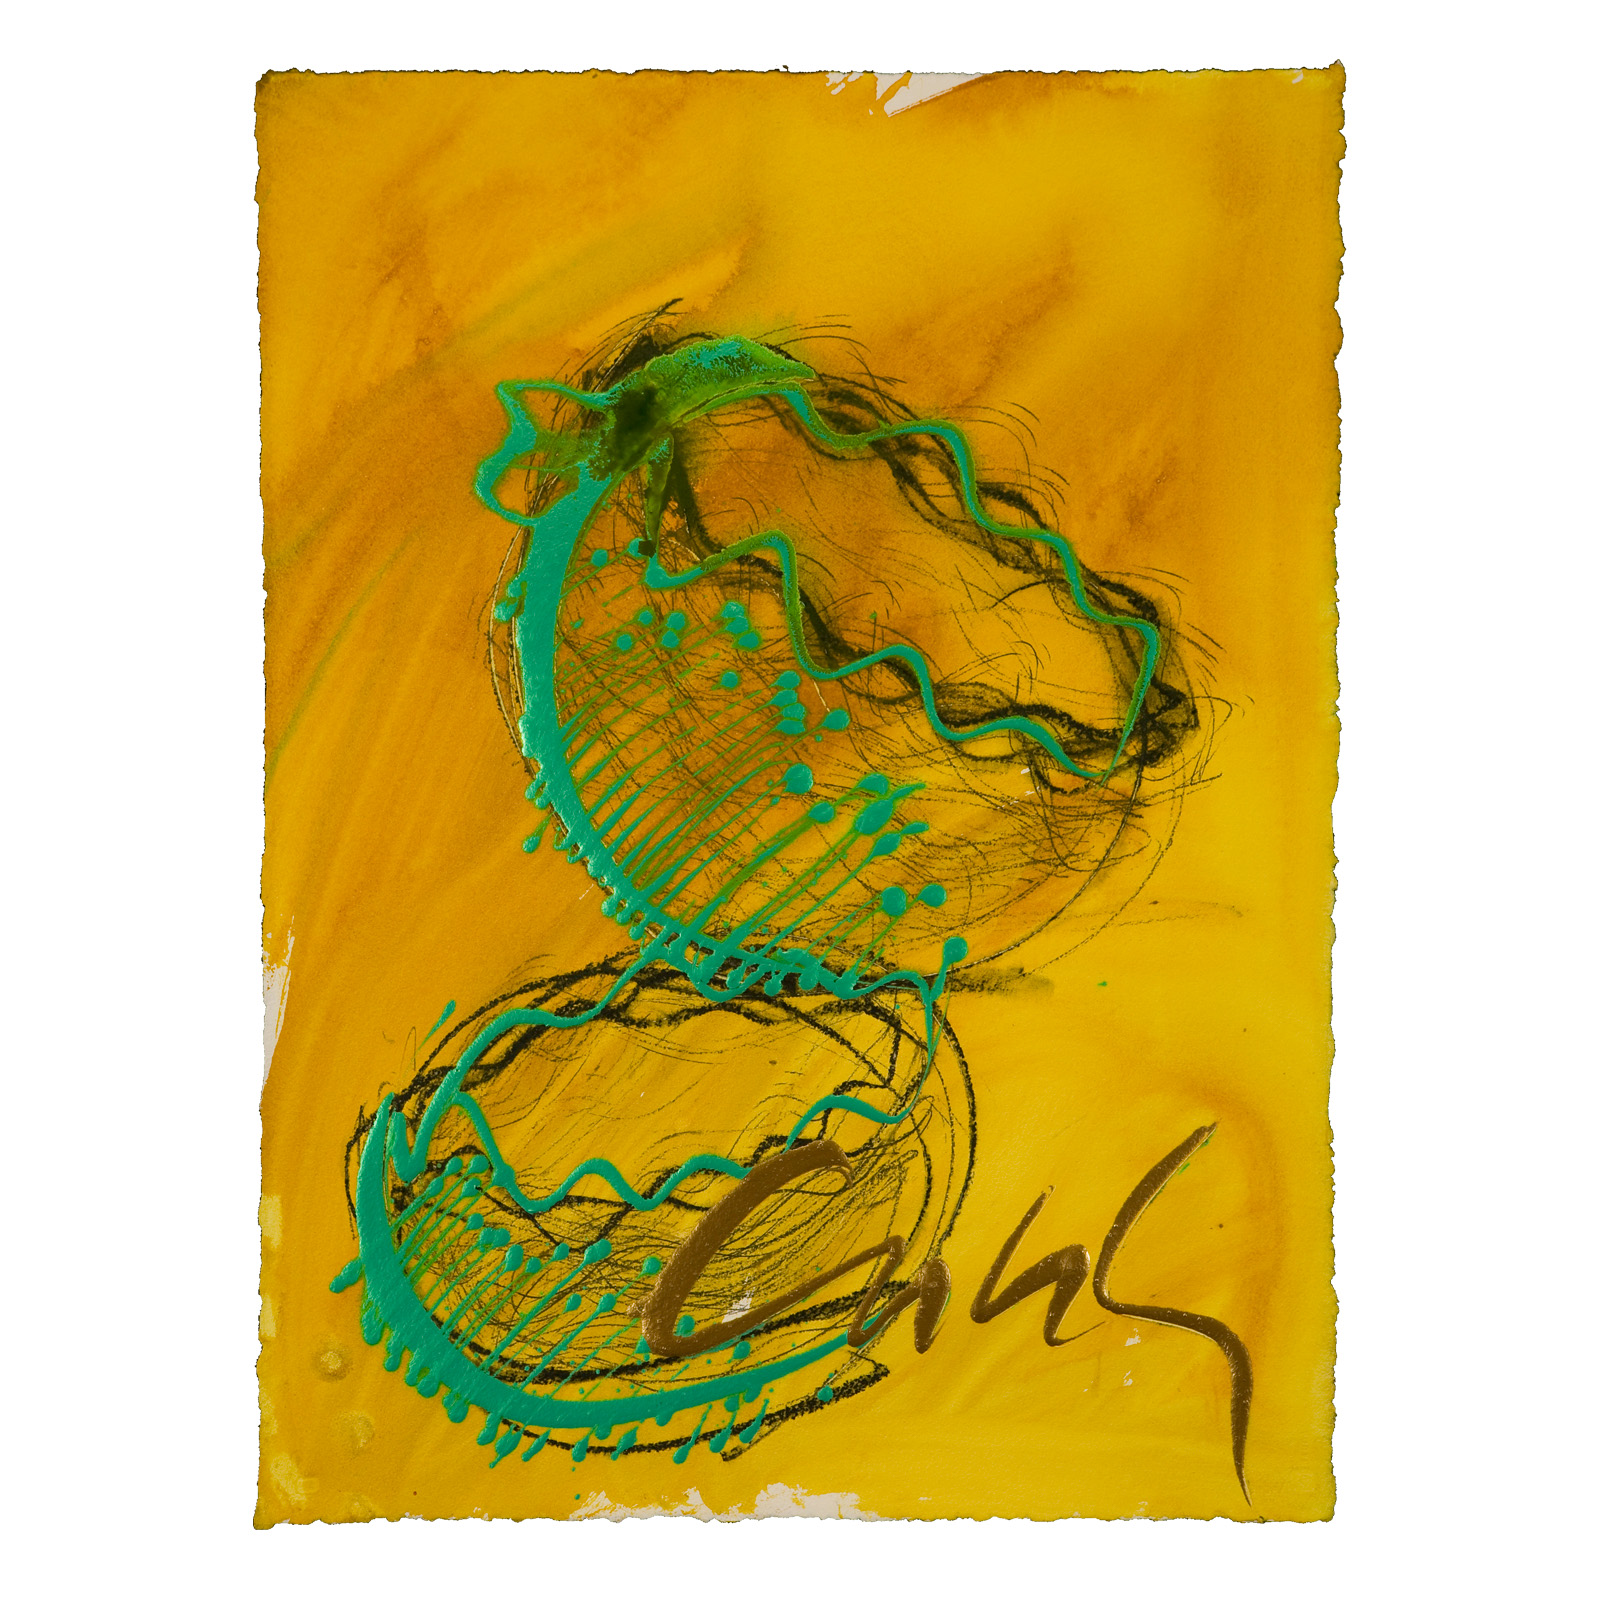 Seaform Drawing, 2008 by Dale Chihuly